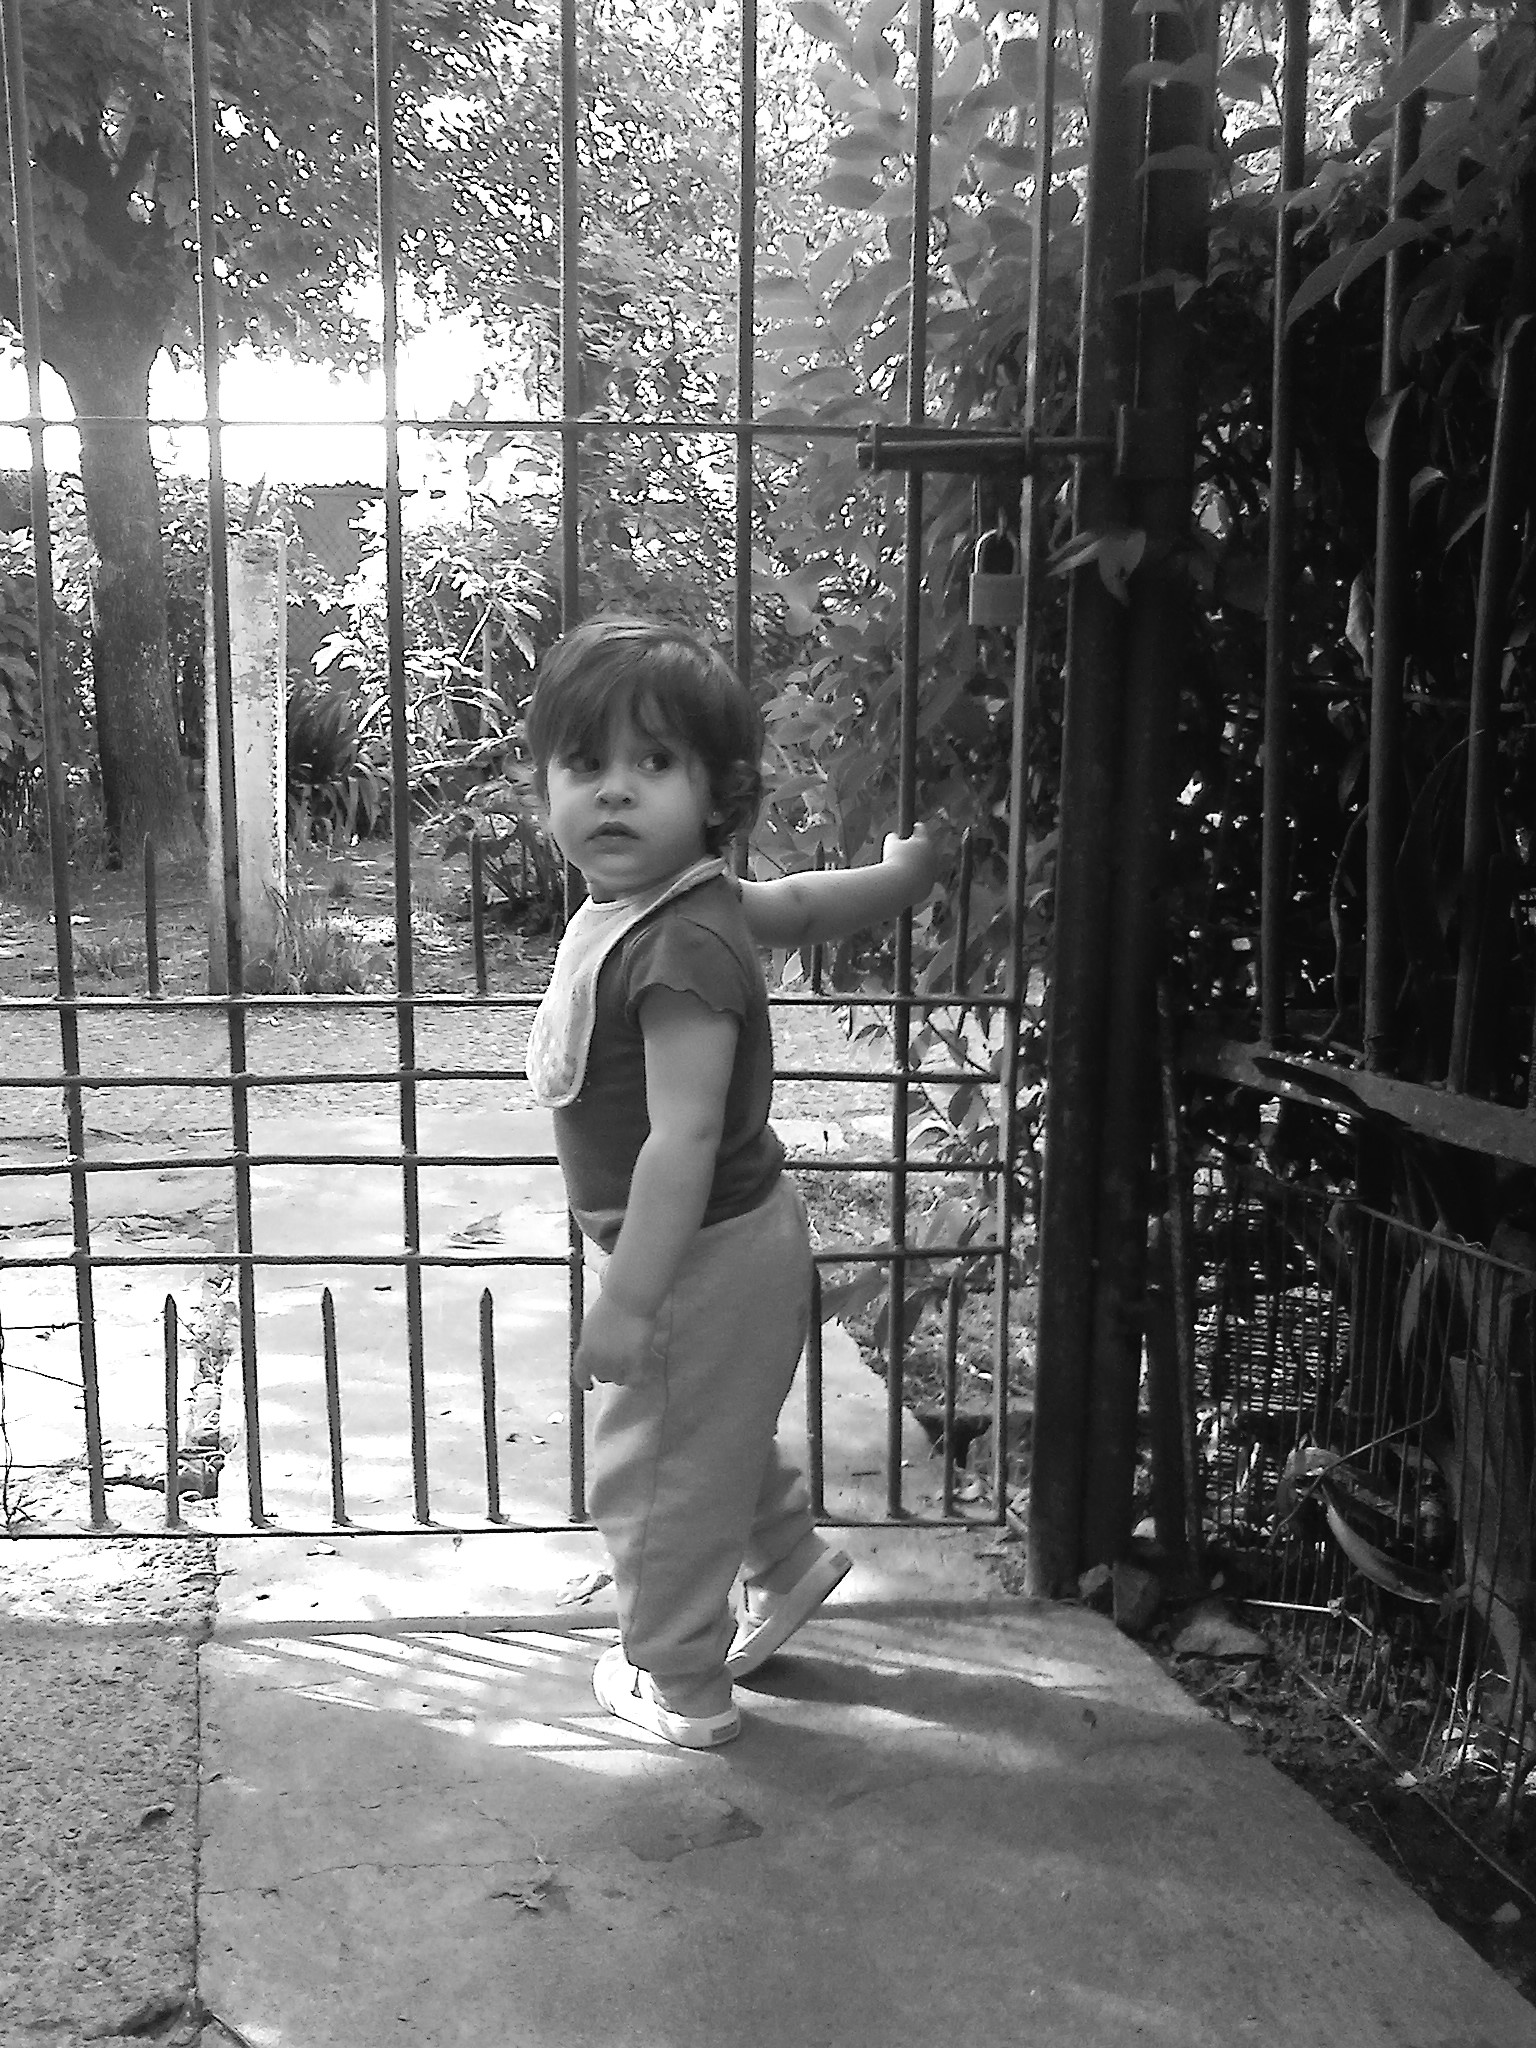 young child wearing sandals walking on walkway near iron fence